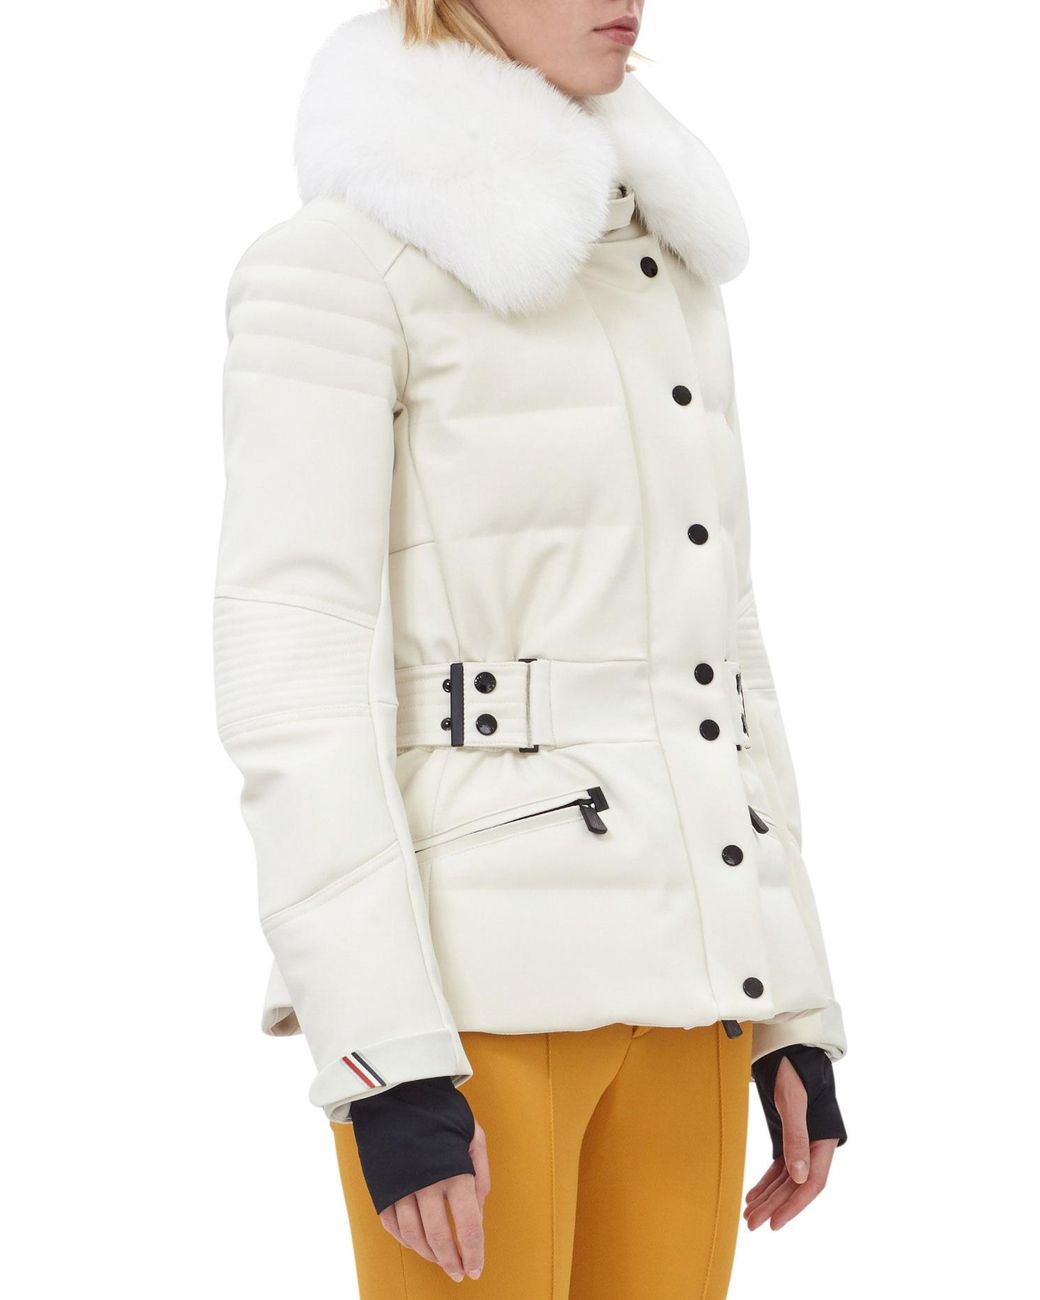 3 MONCLER GRENOBLE Fur Collar Quilted Jacket in White | Lyst